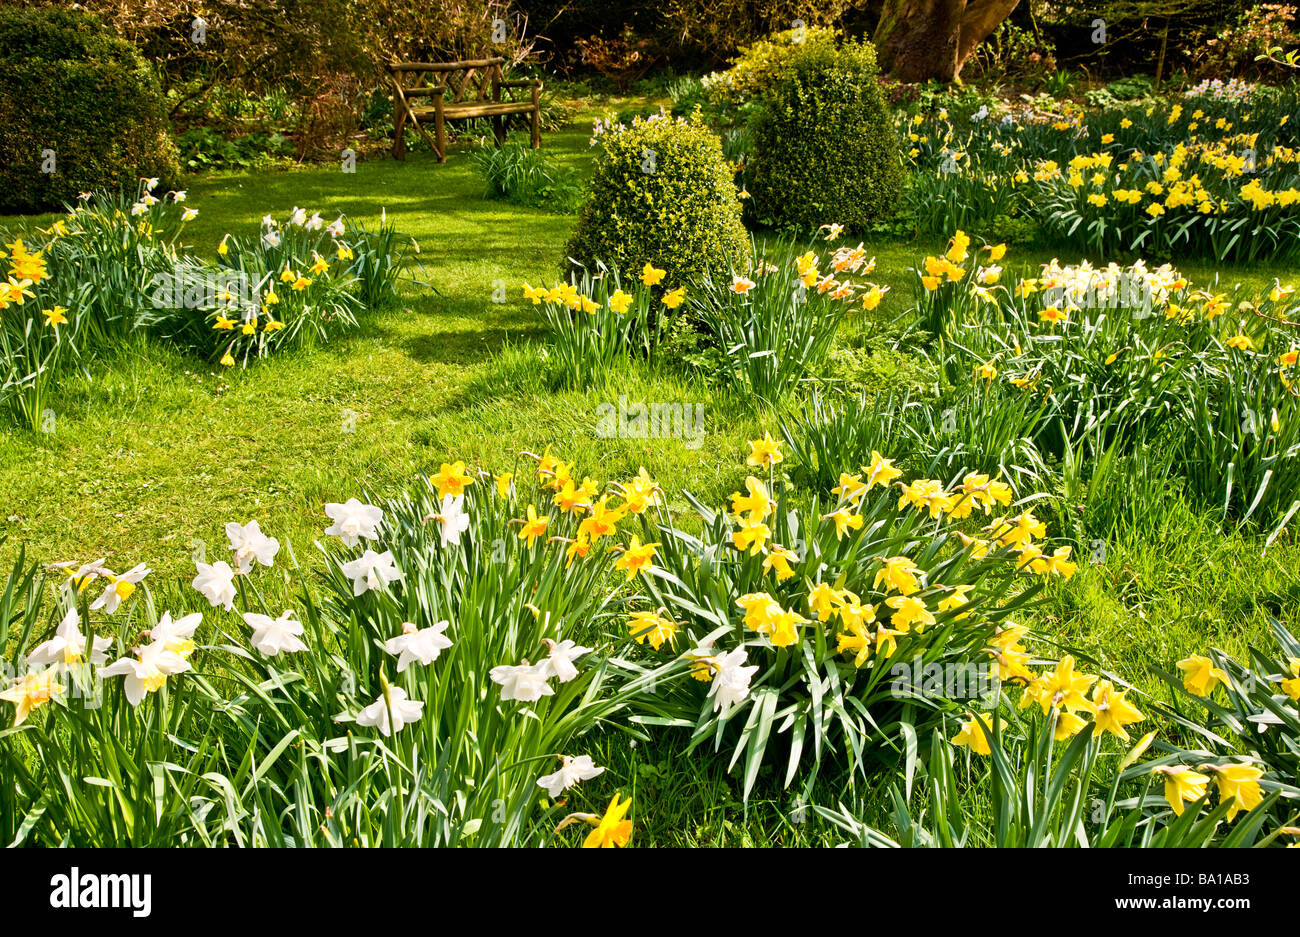 different species, varieties of narcissus in the daffodil garden at